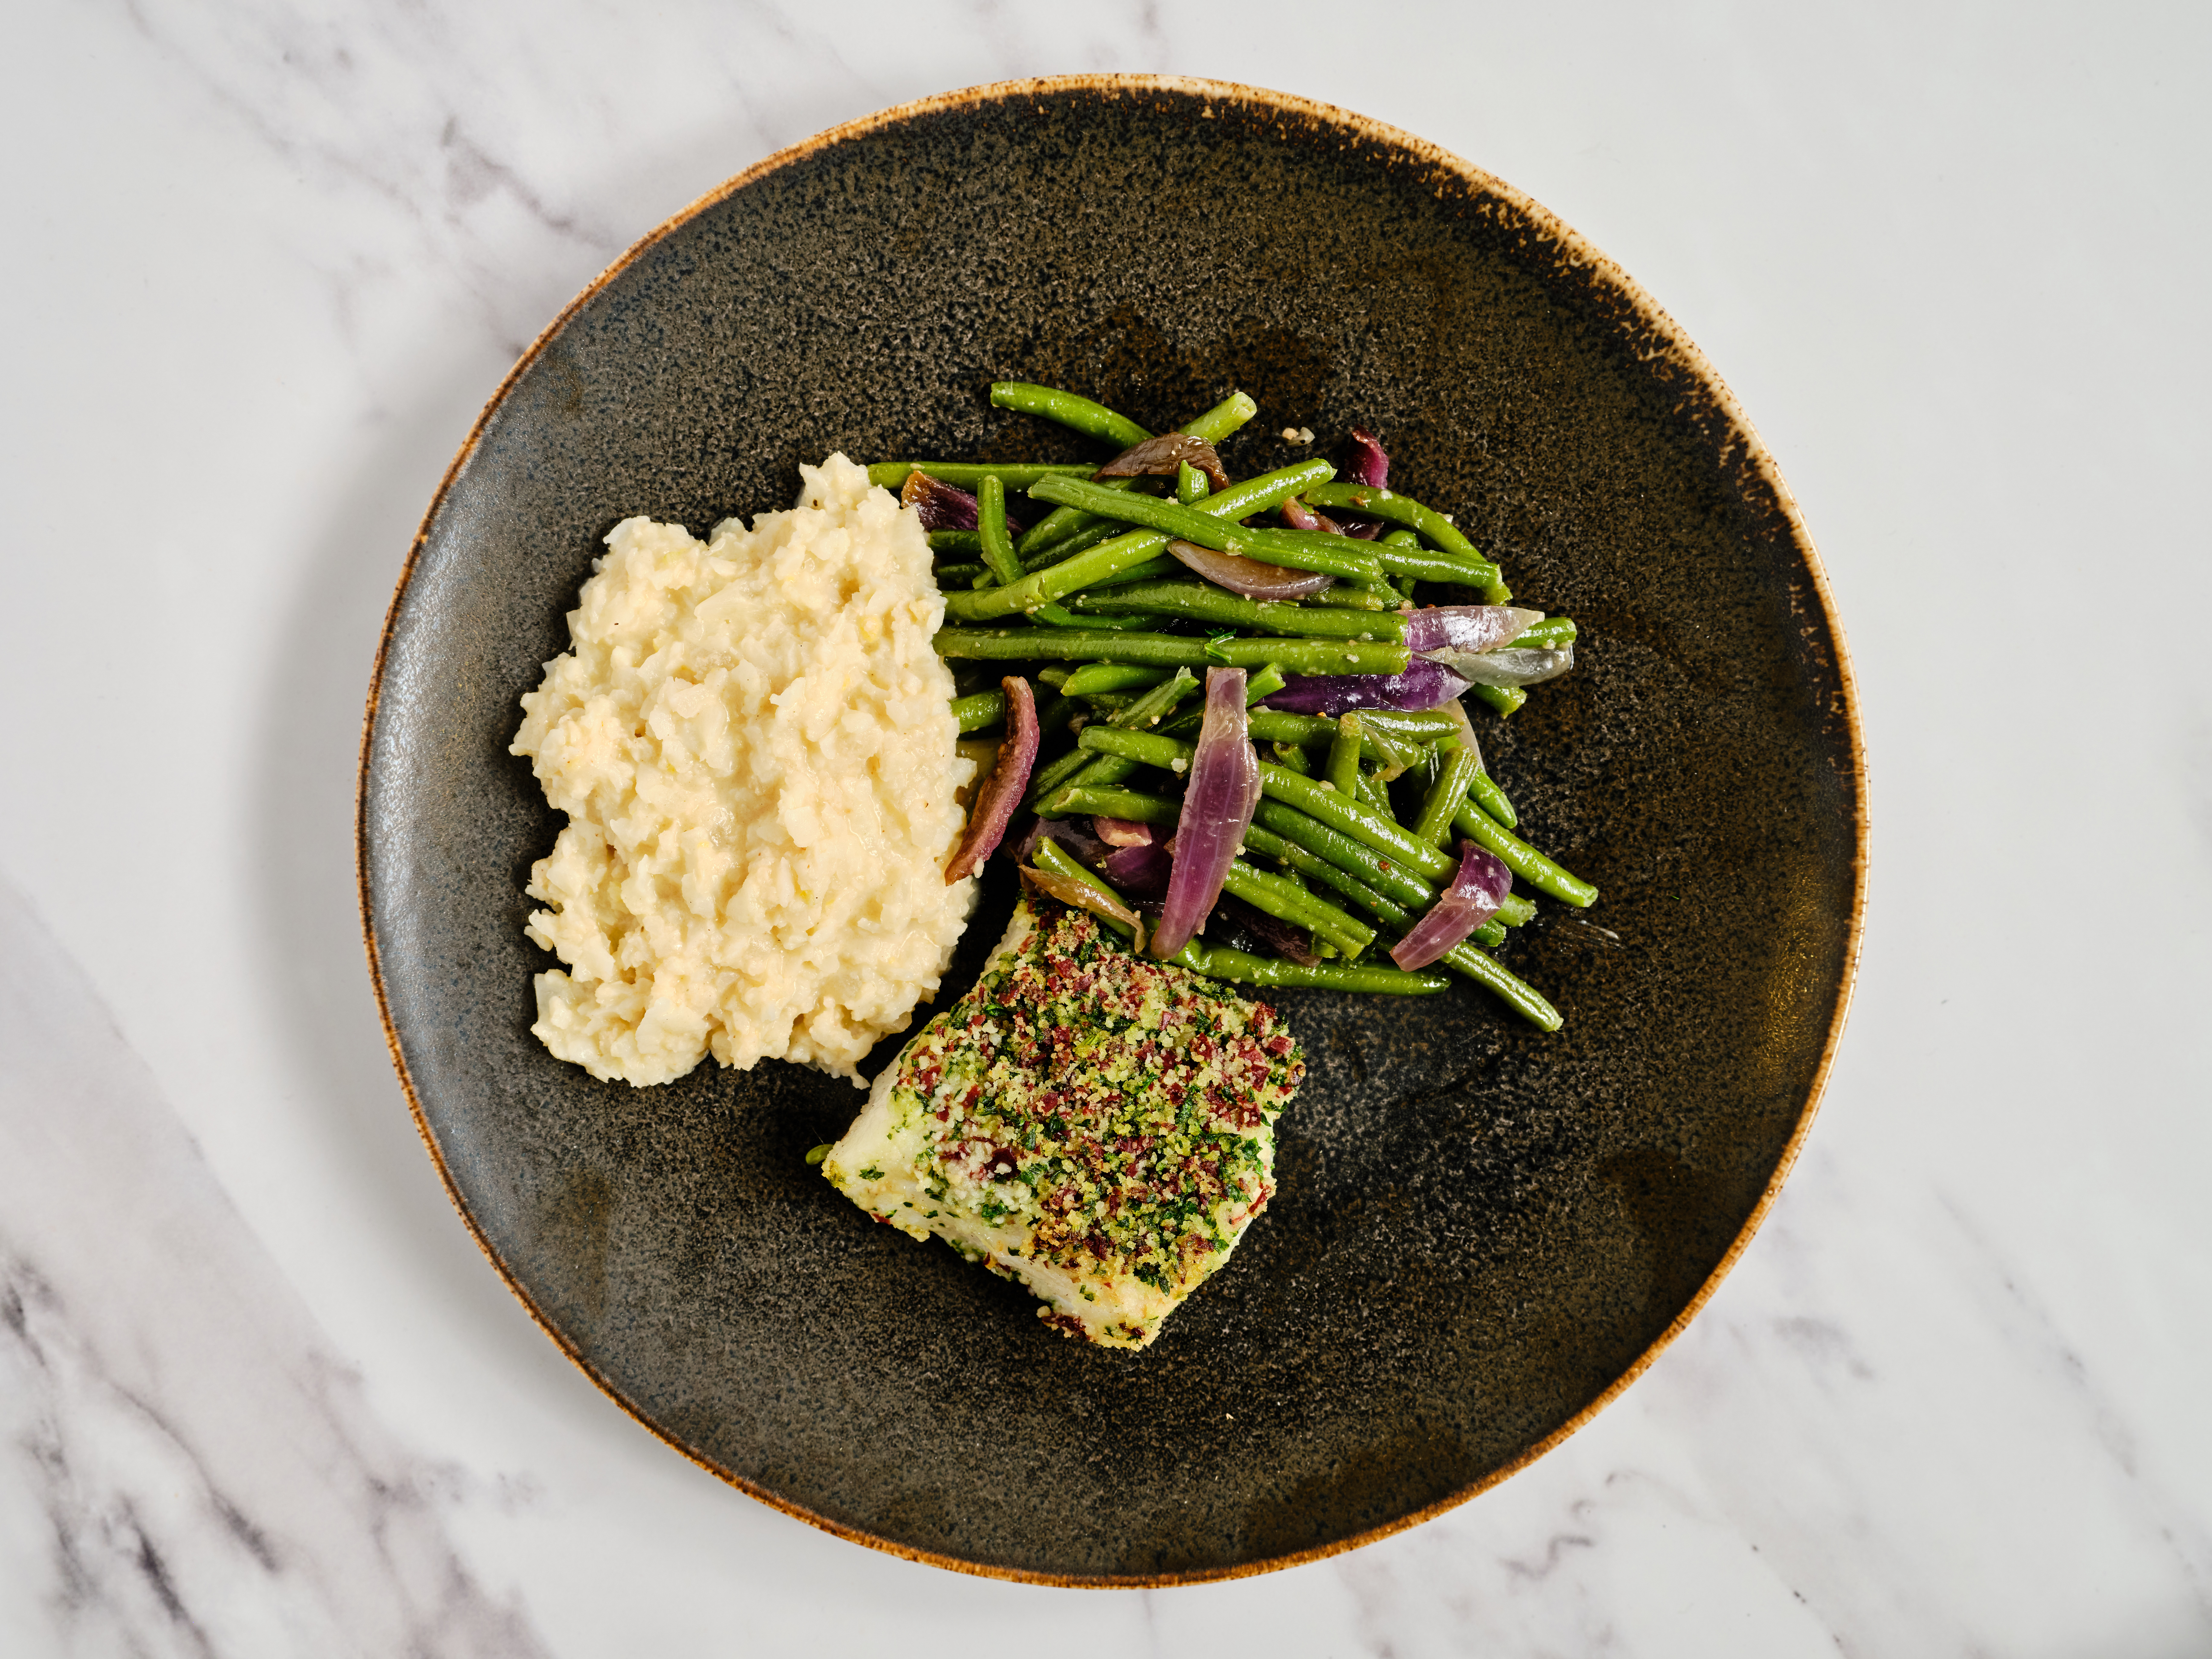 Crusted cod with green beans and risotto served on a dark plate